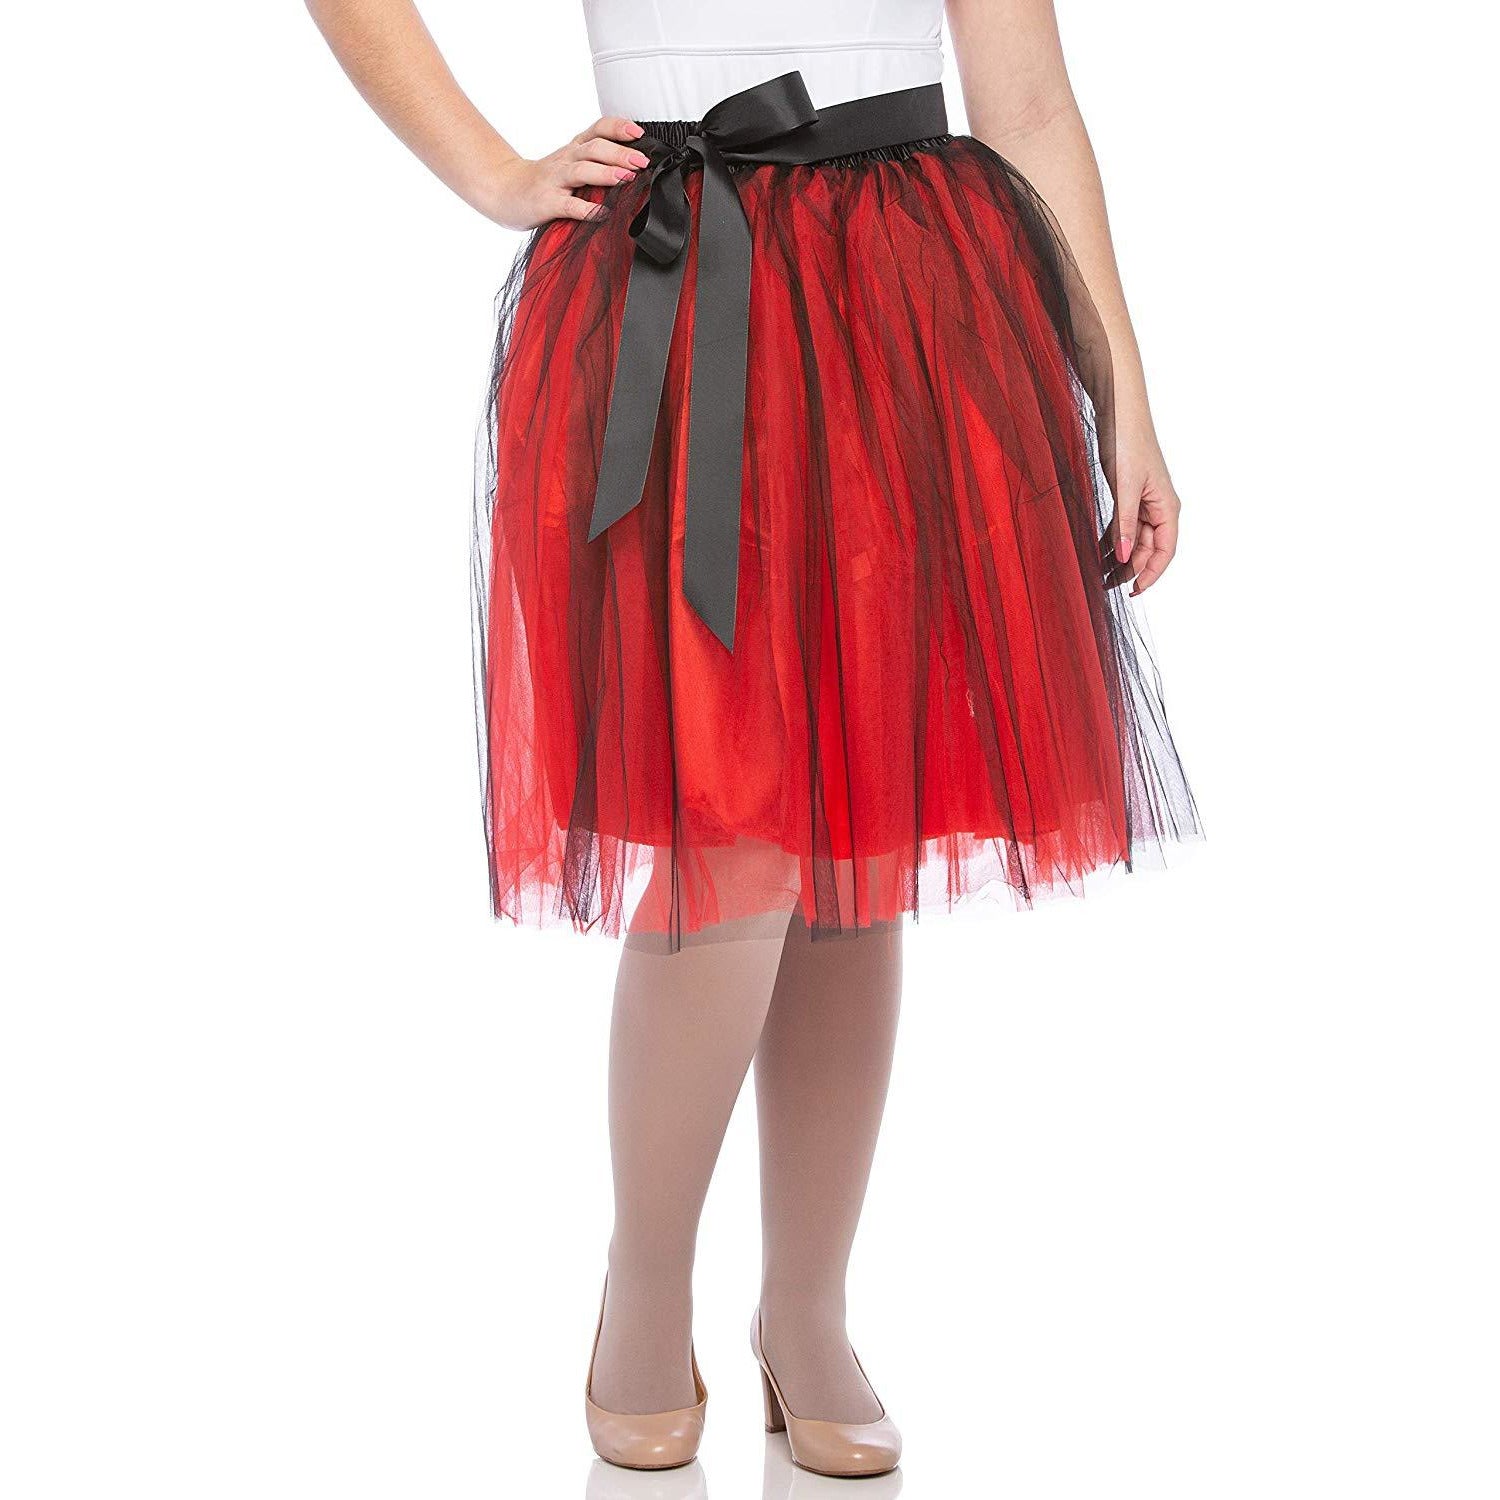 Adults & Girls A-line Knee Length Tutu Tulle Skirt - Regular and Plus Size Red Black